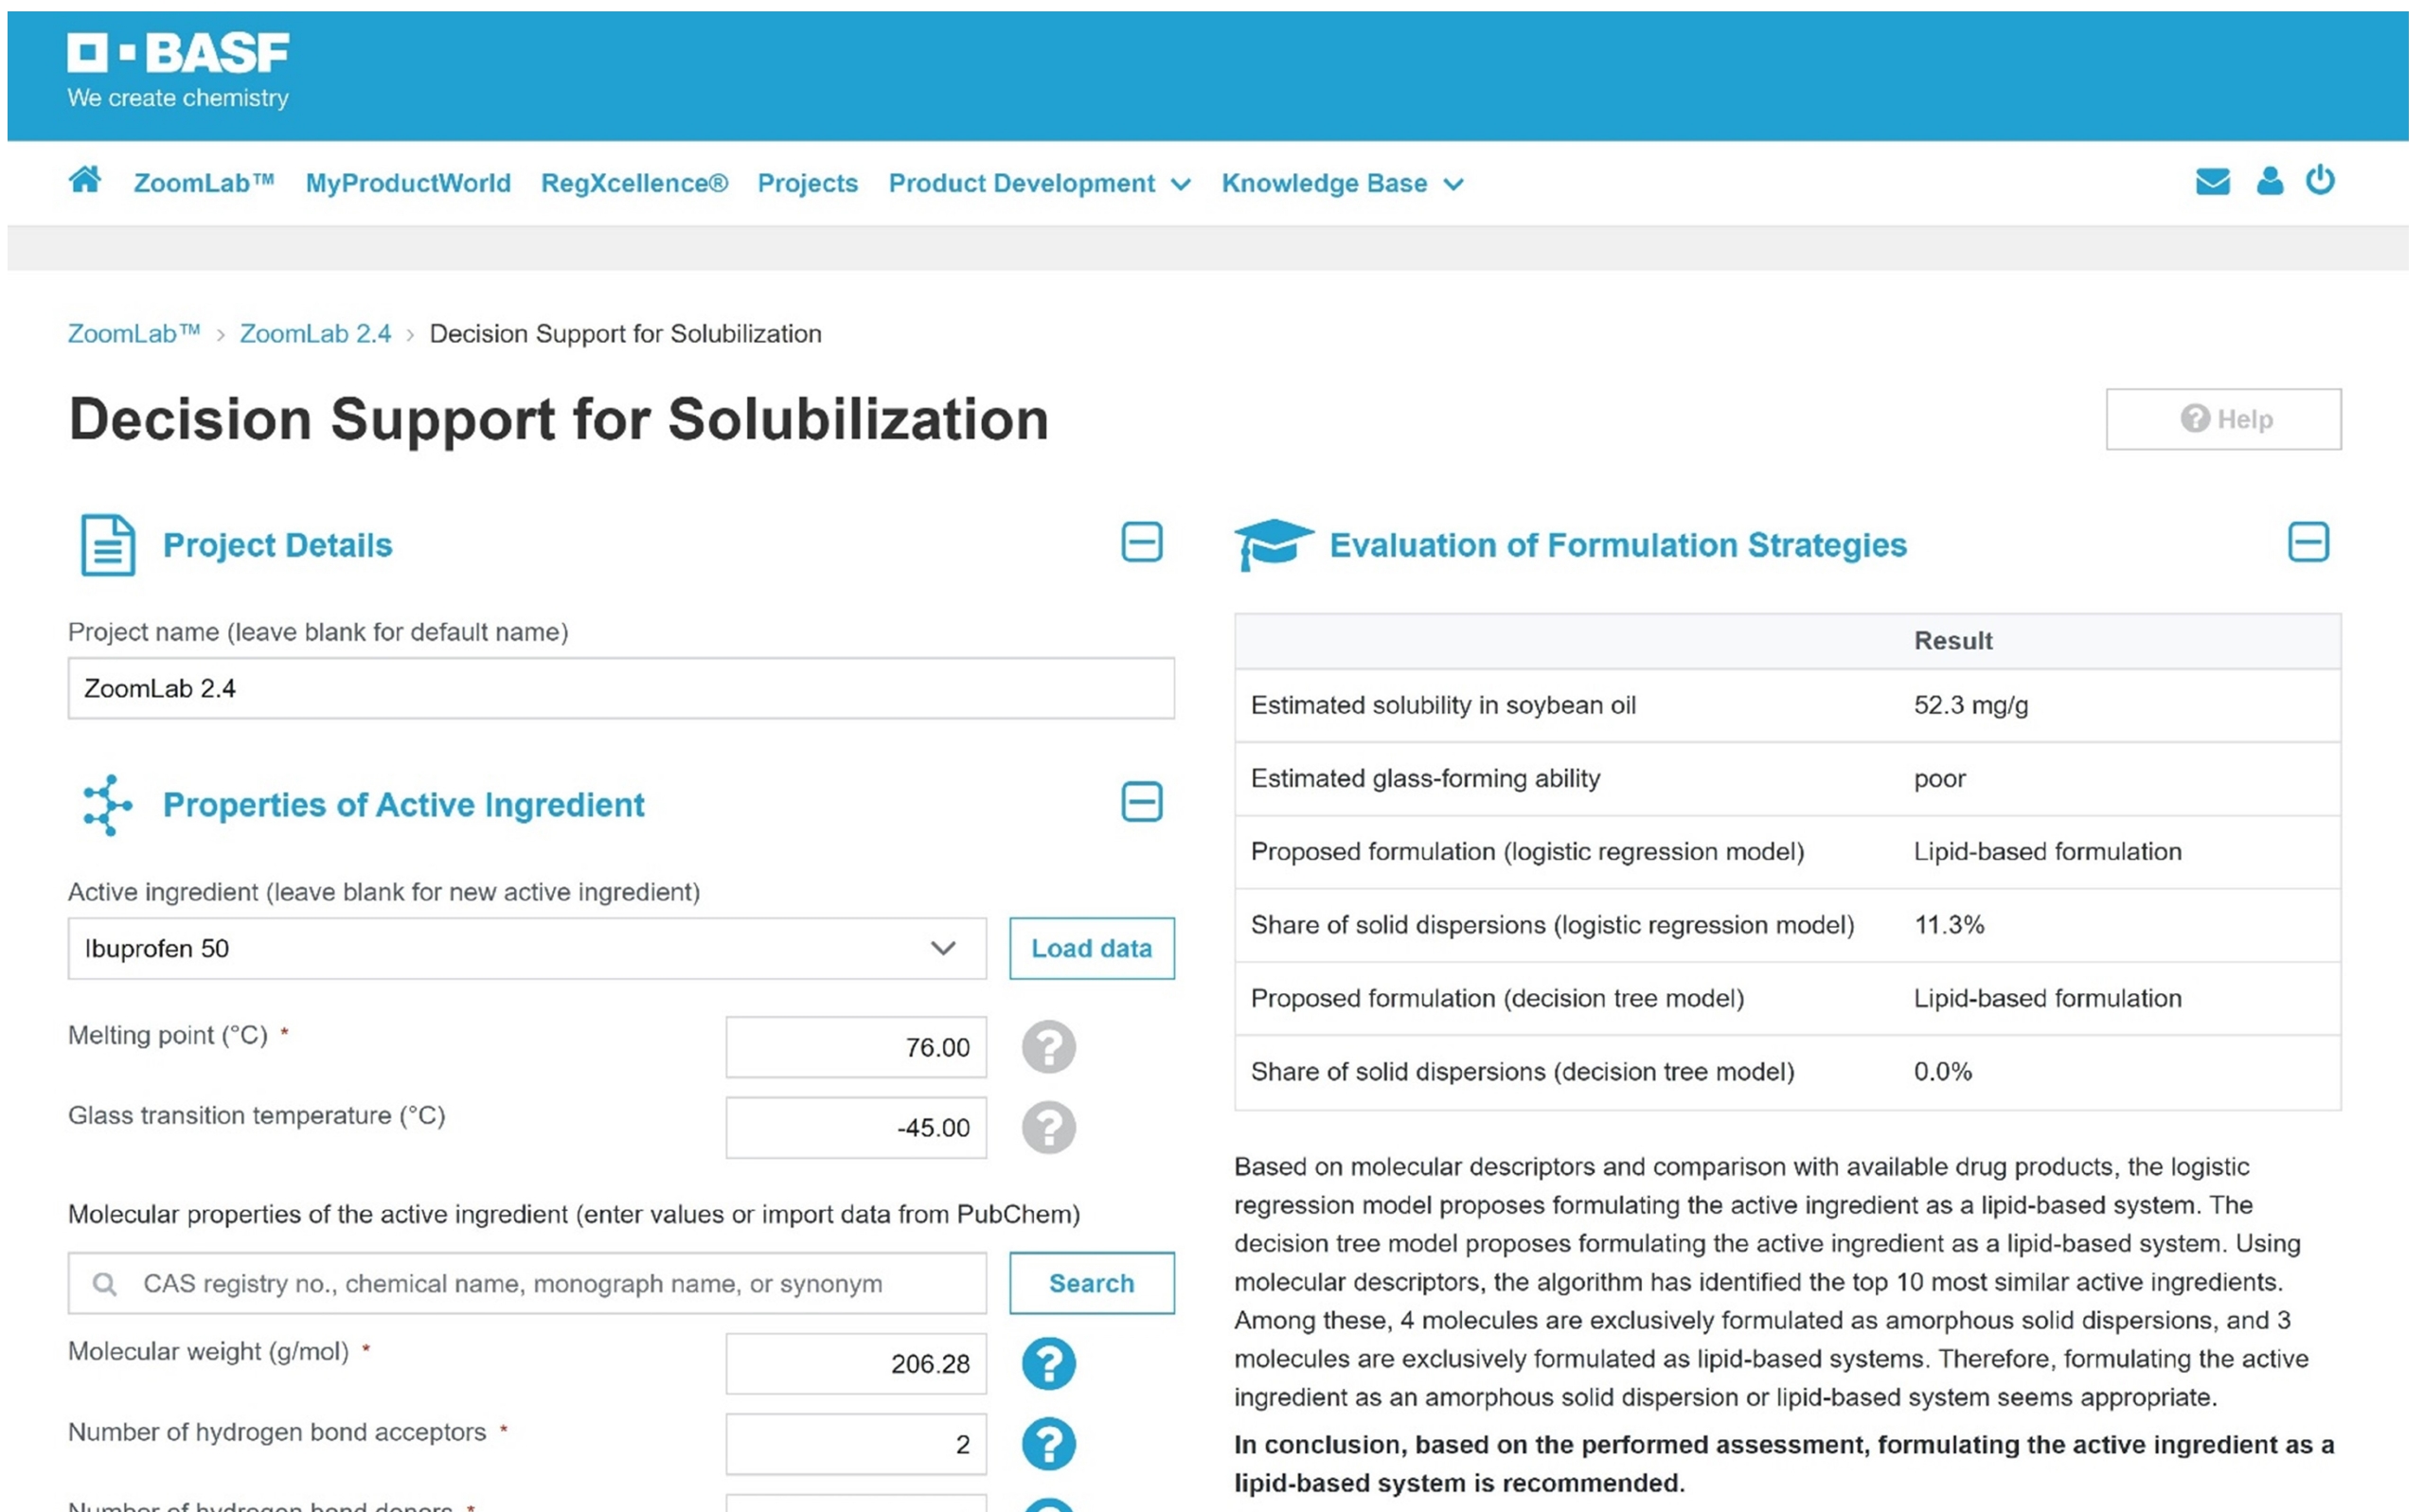 Decision Support for Solubilization is now available in ZoomLab™